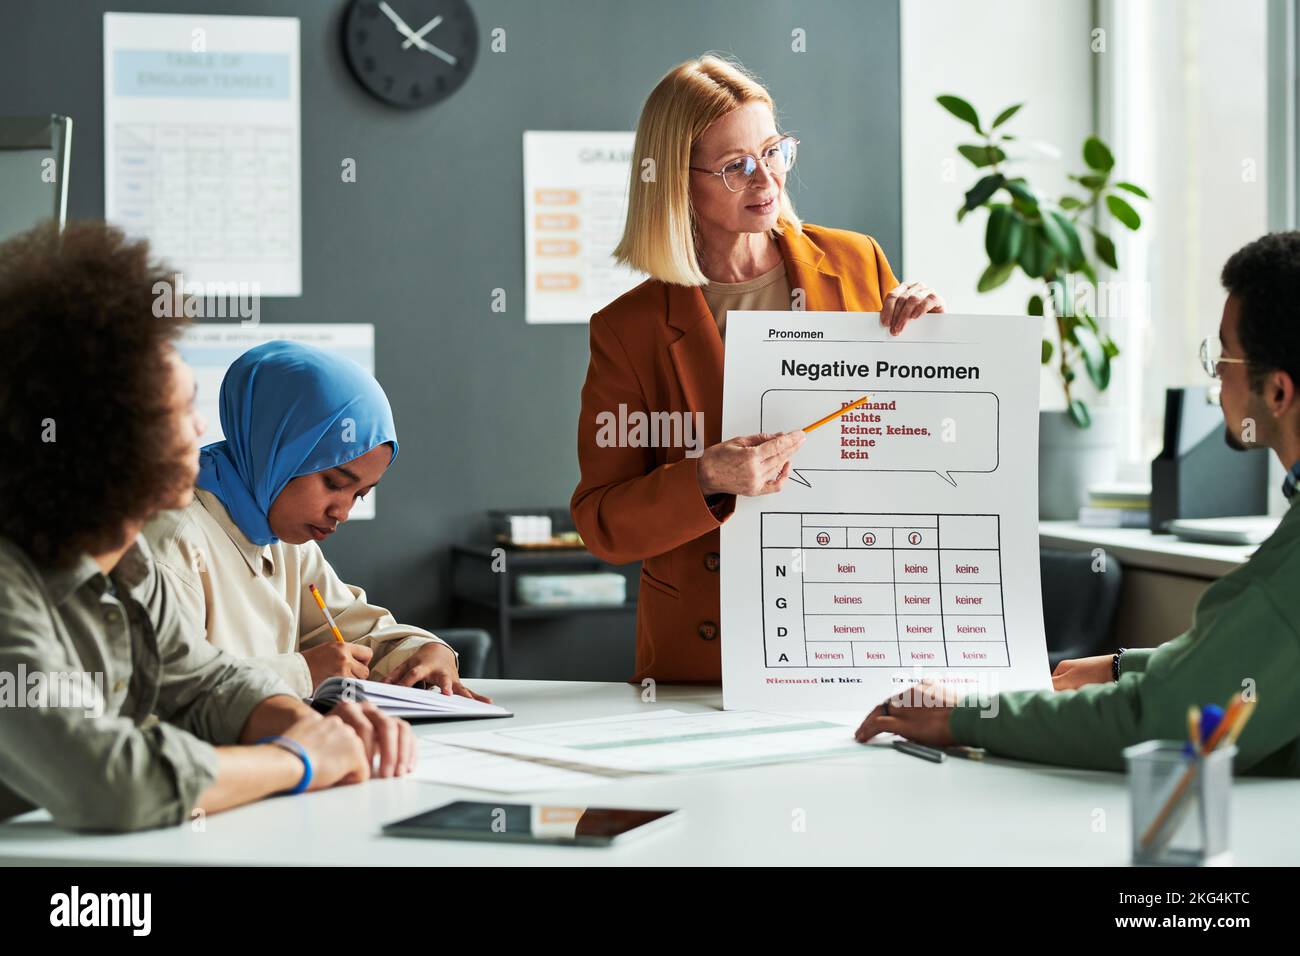 Confident teacher of German language explaining negative pronouns to group of students while pointing at table during presentation Stock Photo